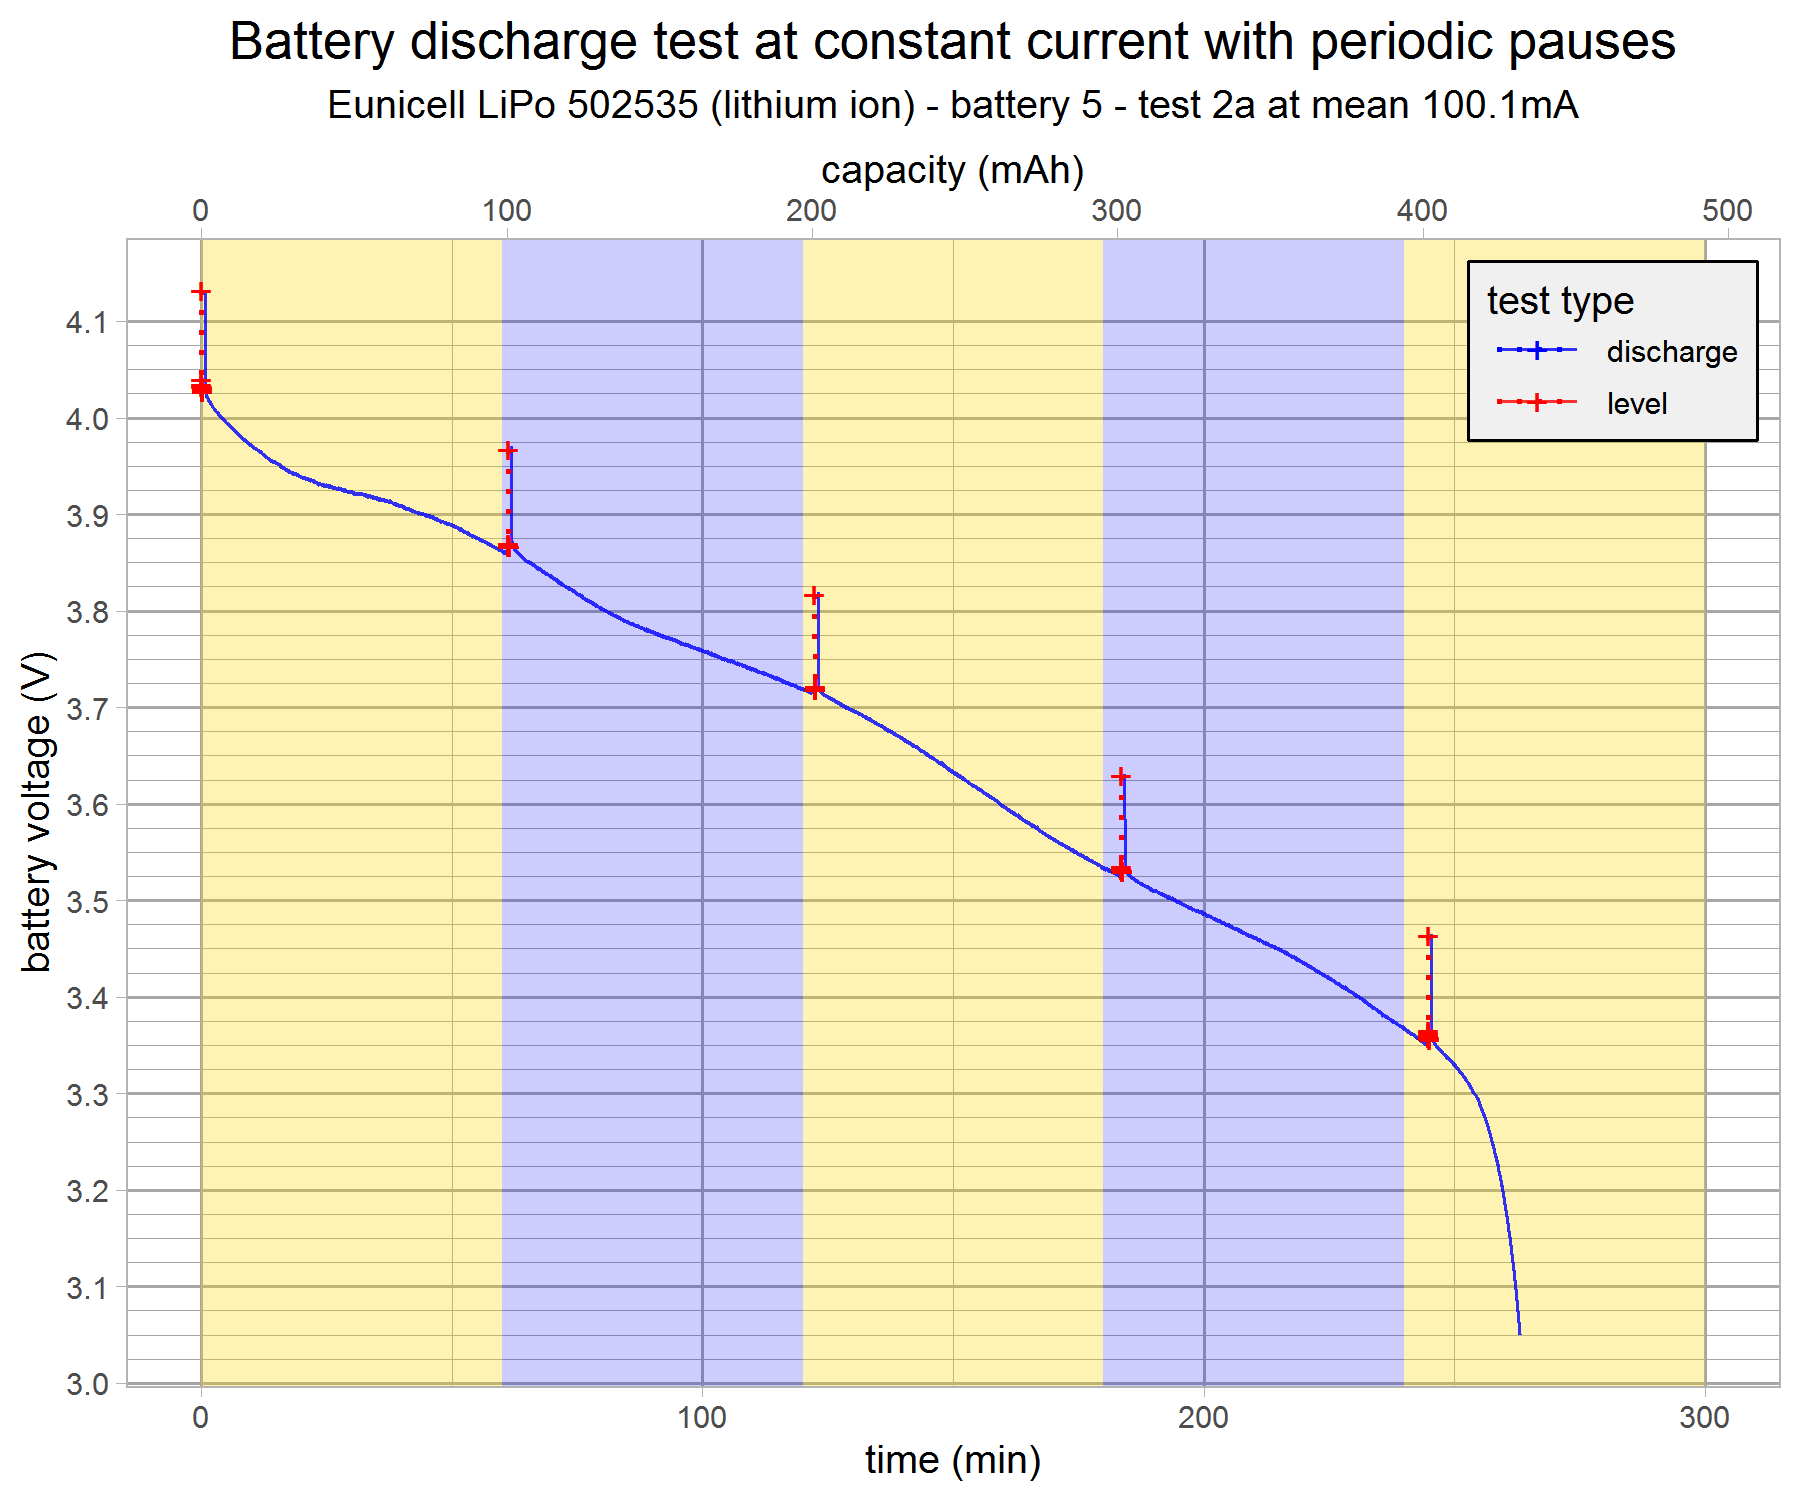 battery-discharge-test-eunicell-b5-2a-v9-g7.png